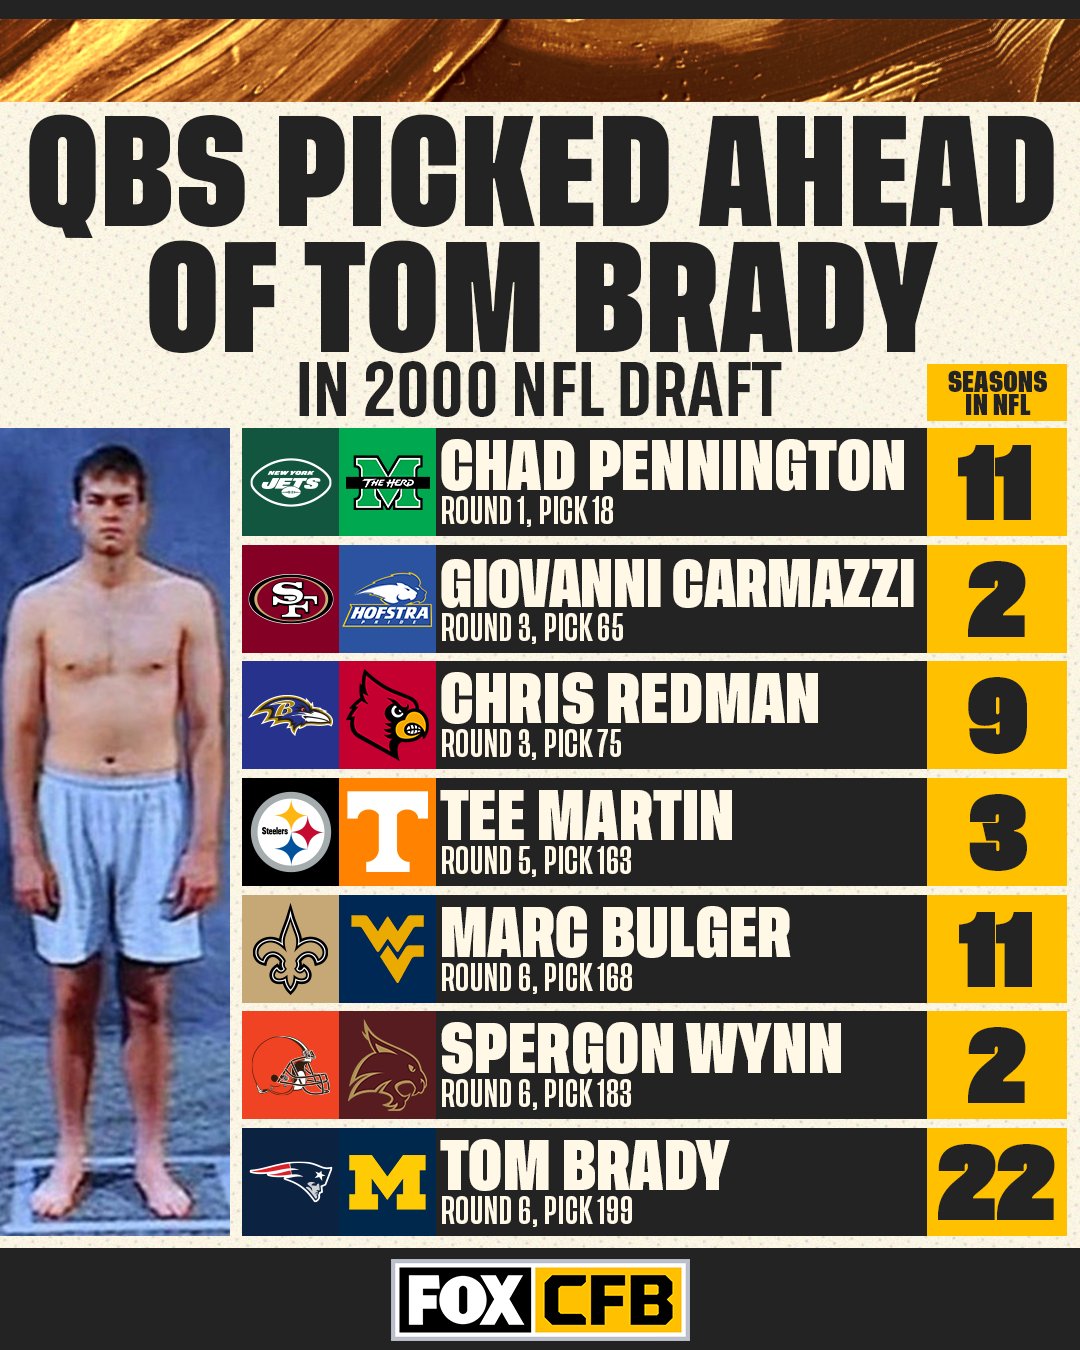 FOX College Football on X: Tom Brady was in the NFL twice as long as any  QB picked ahead of him in the 2000 NFL Draft 😳  / X